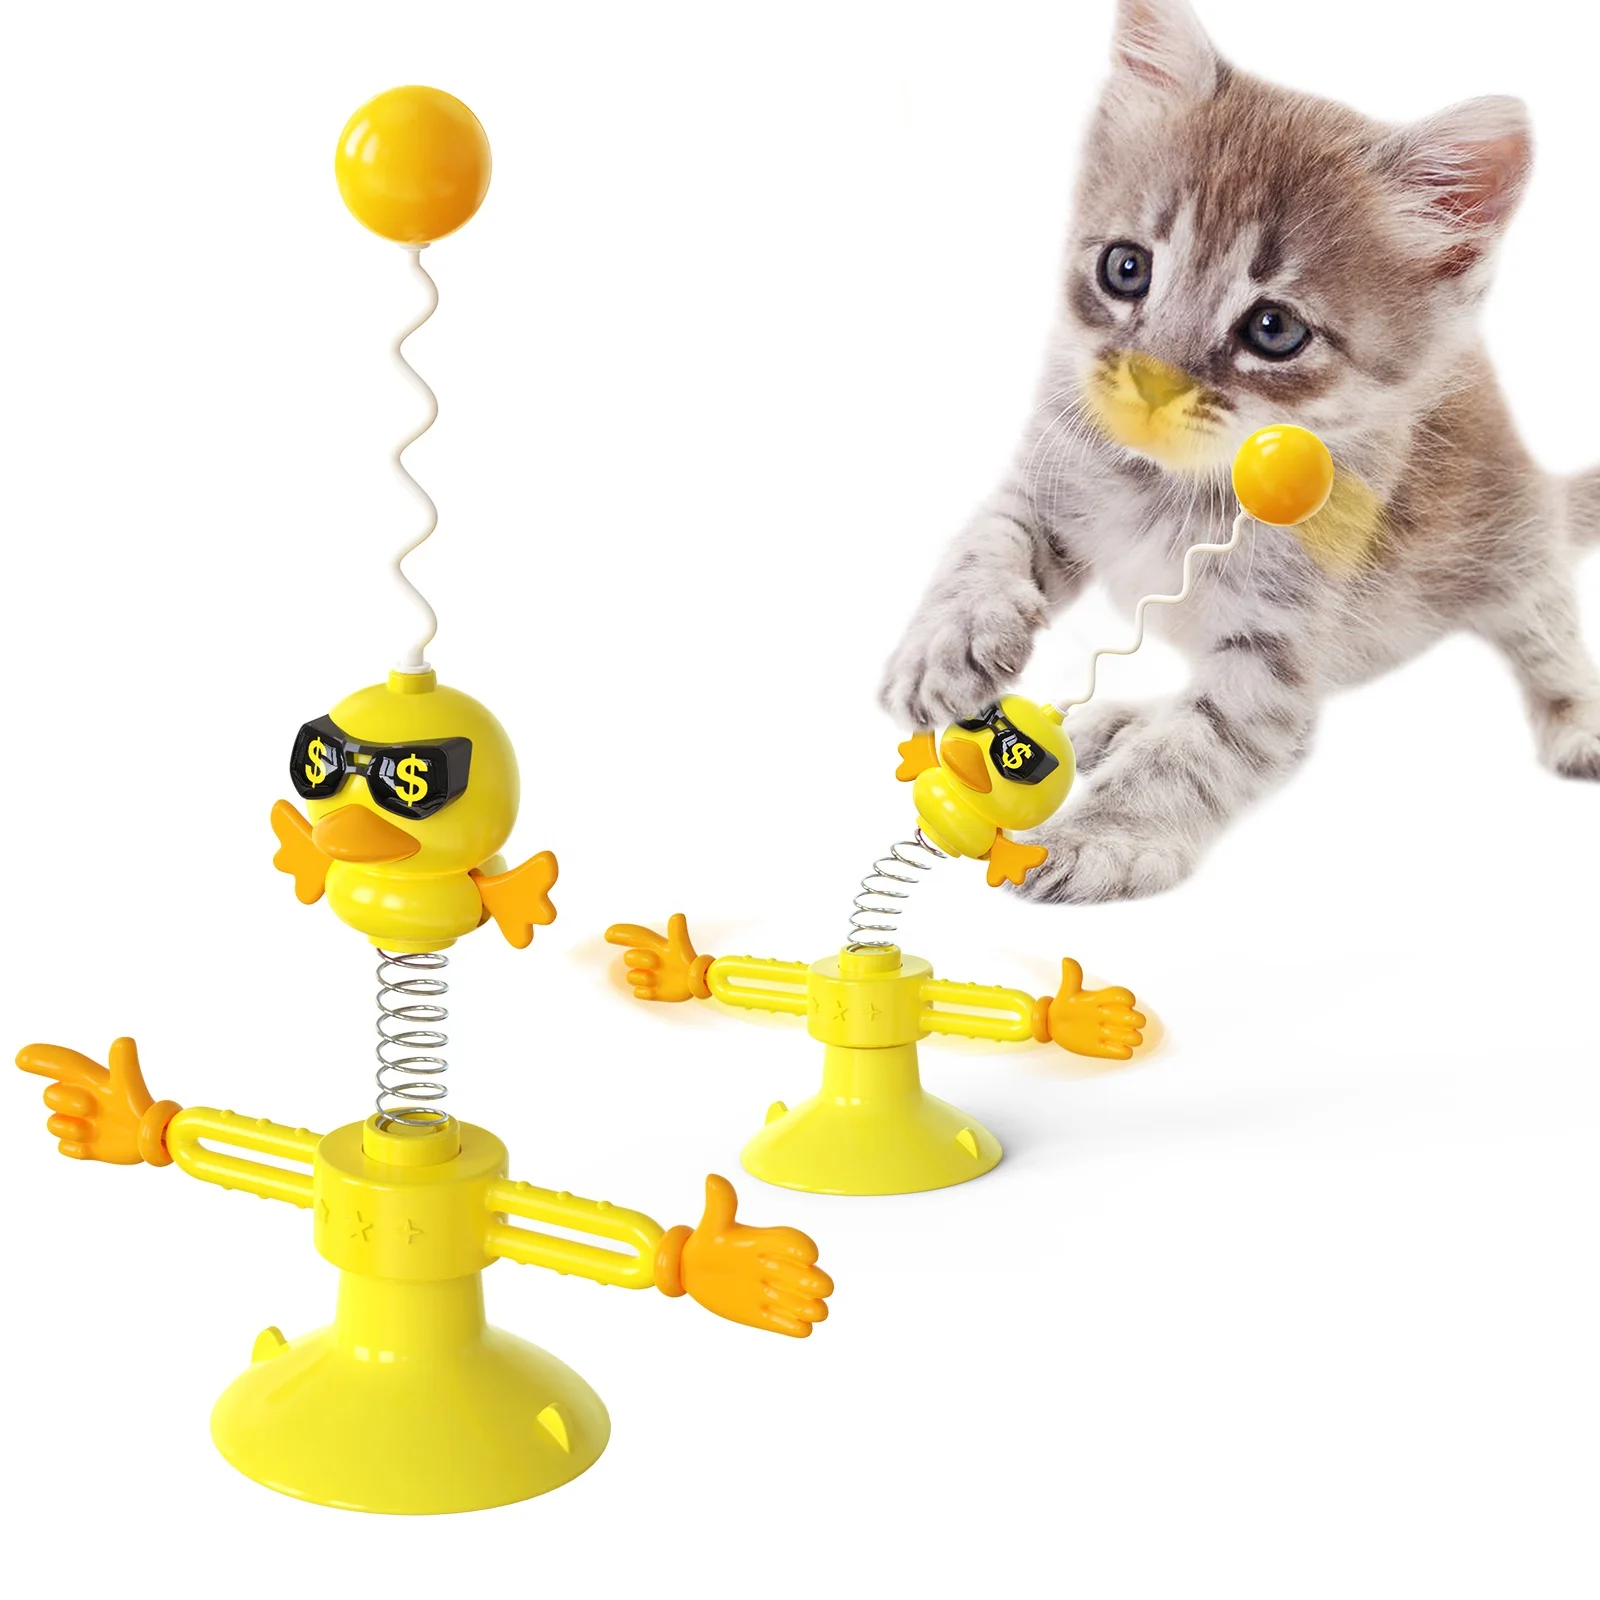 

Secure spring bird sound pet funny stick cat teaser wand biting intelligence bounced sucker tumbler interactive cat toys cat spr, Yellow pink